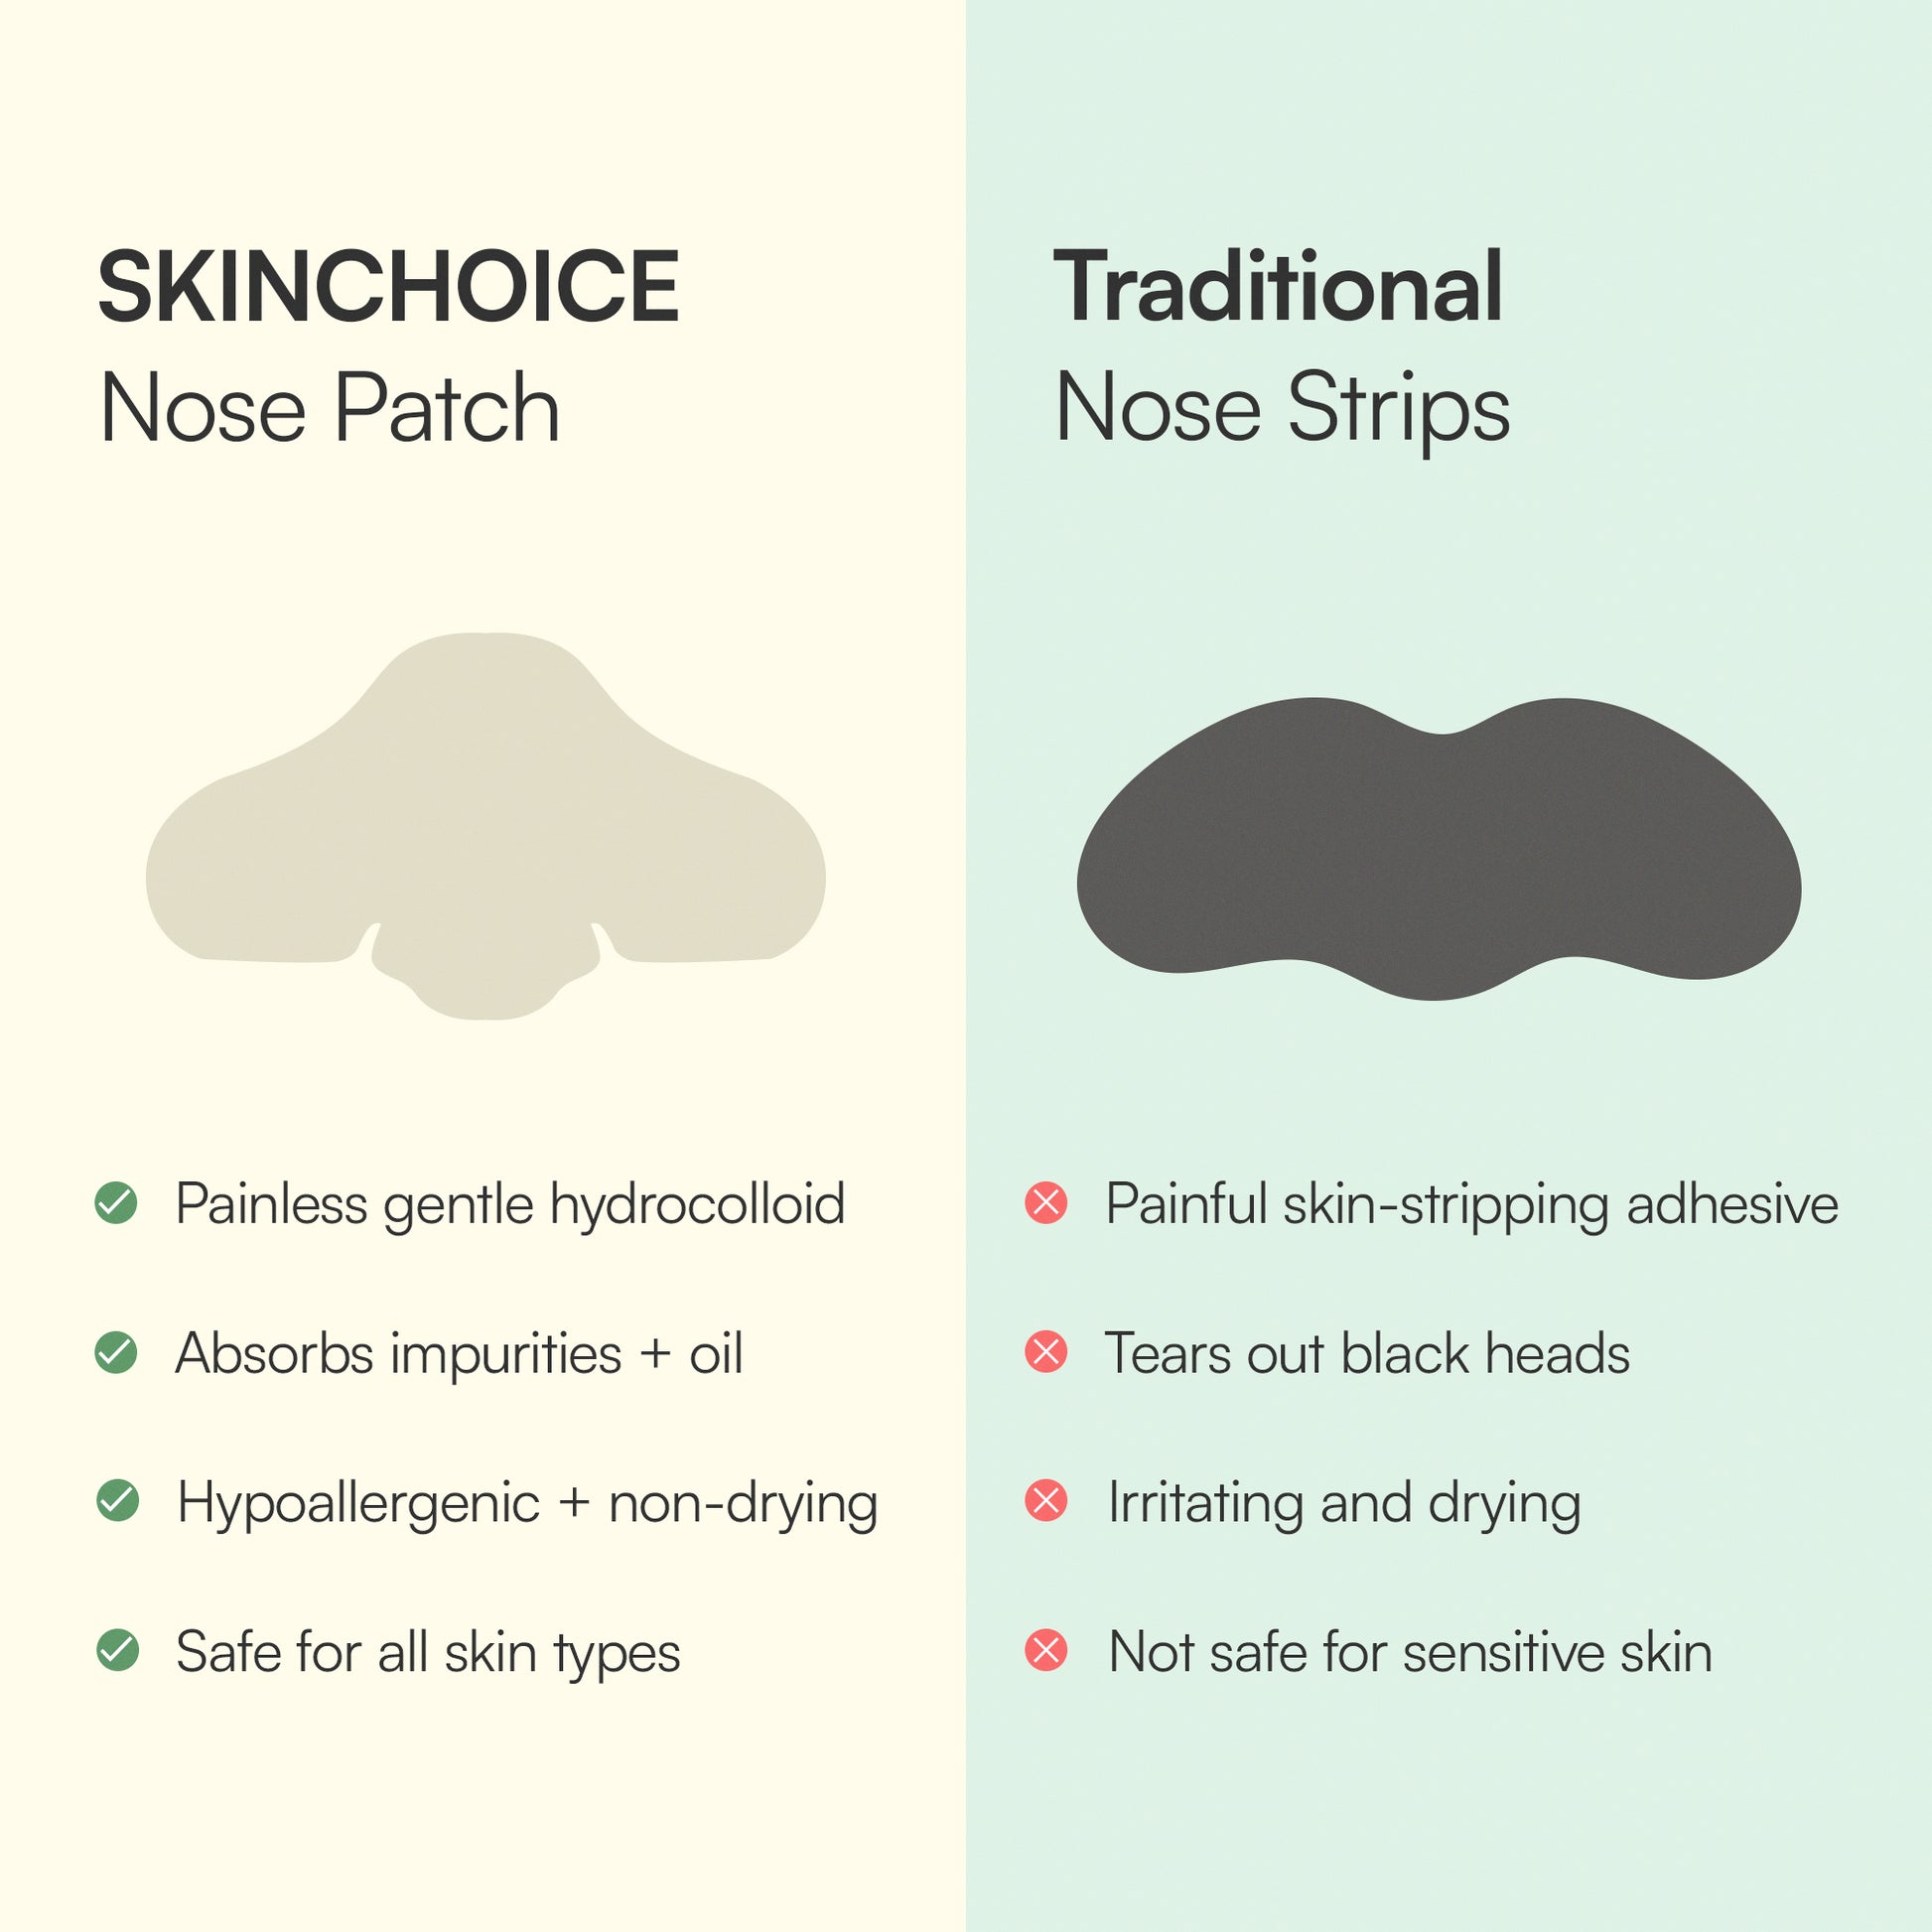 Illustration comparing Skin Choice and traditional nose pore patches, Skinchoice Nose Patch